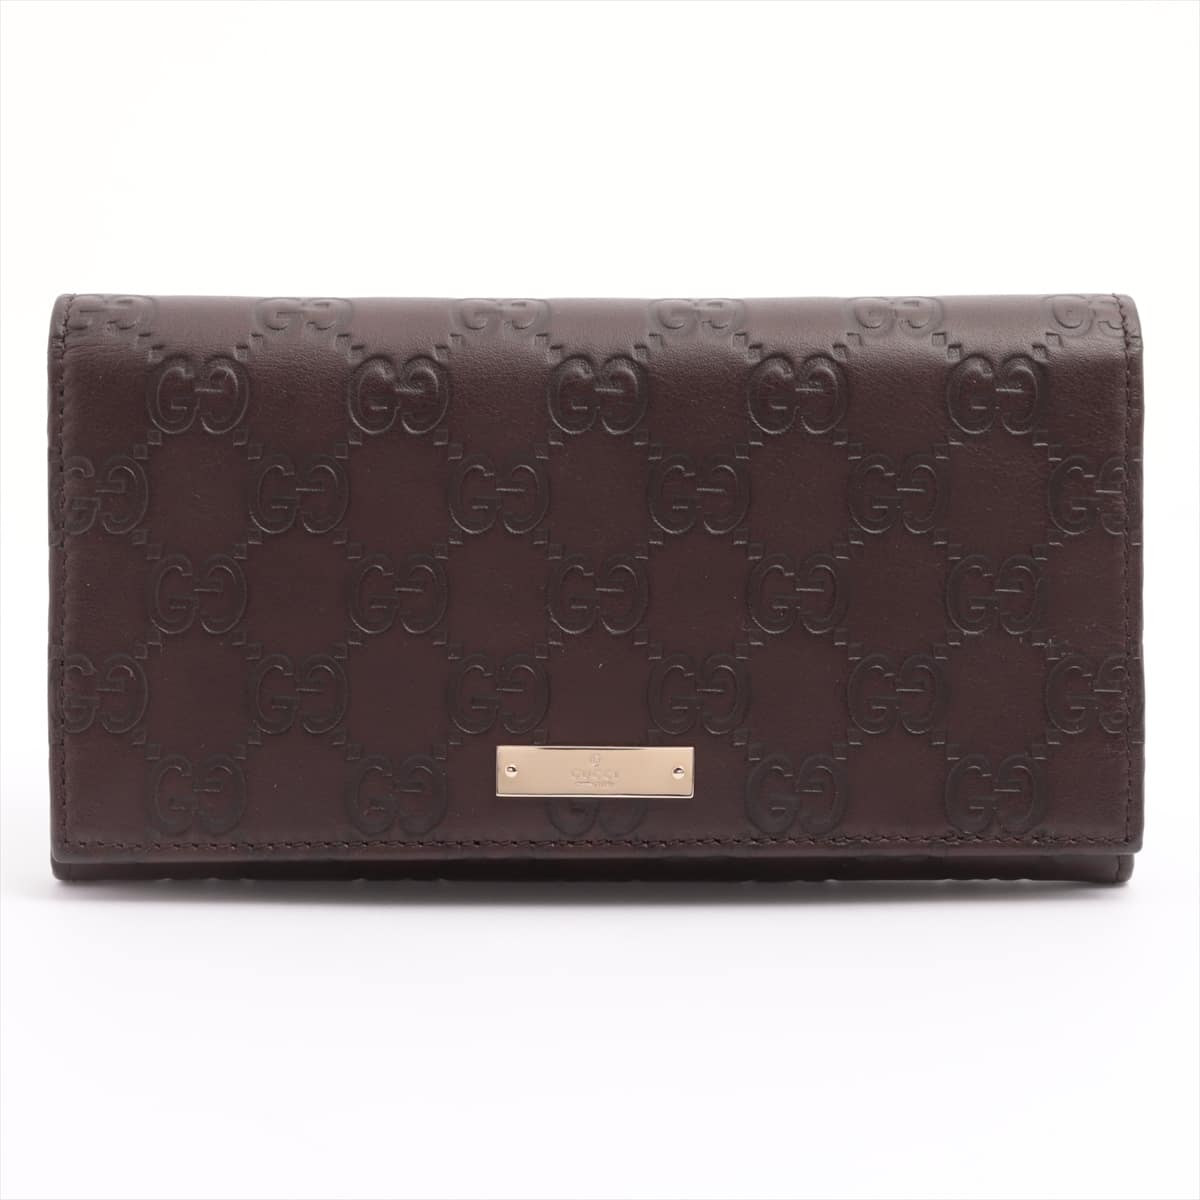 Gucci Guccissima 244946 Leather Wallet Brown